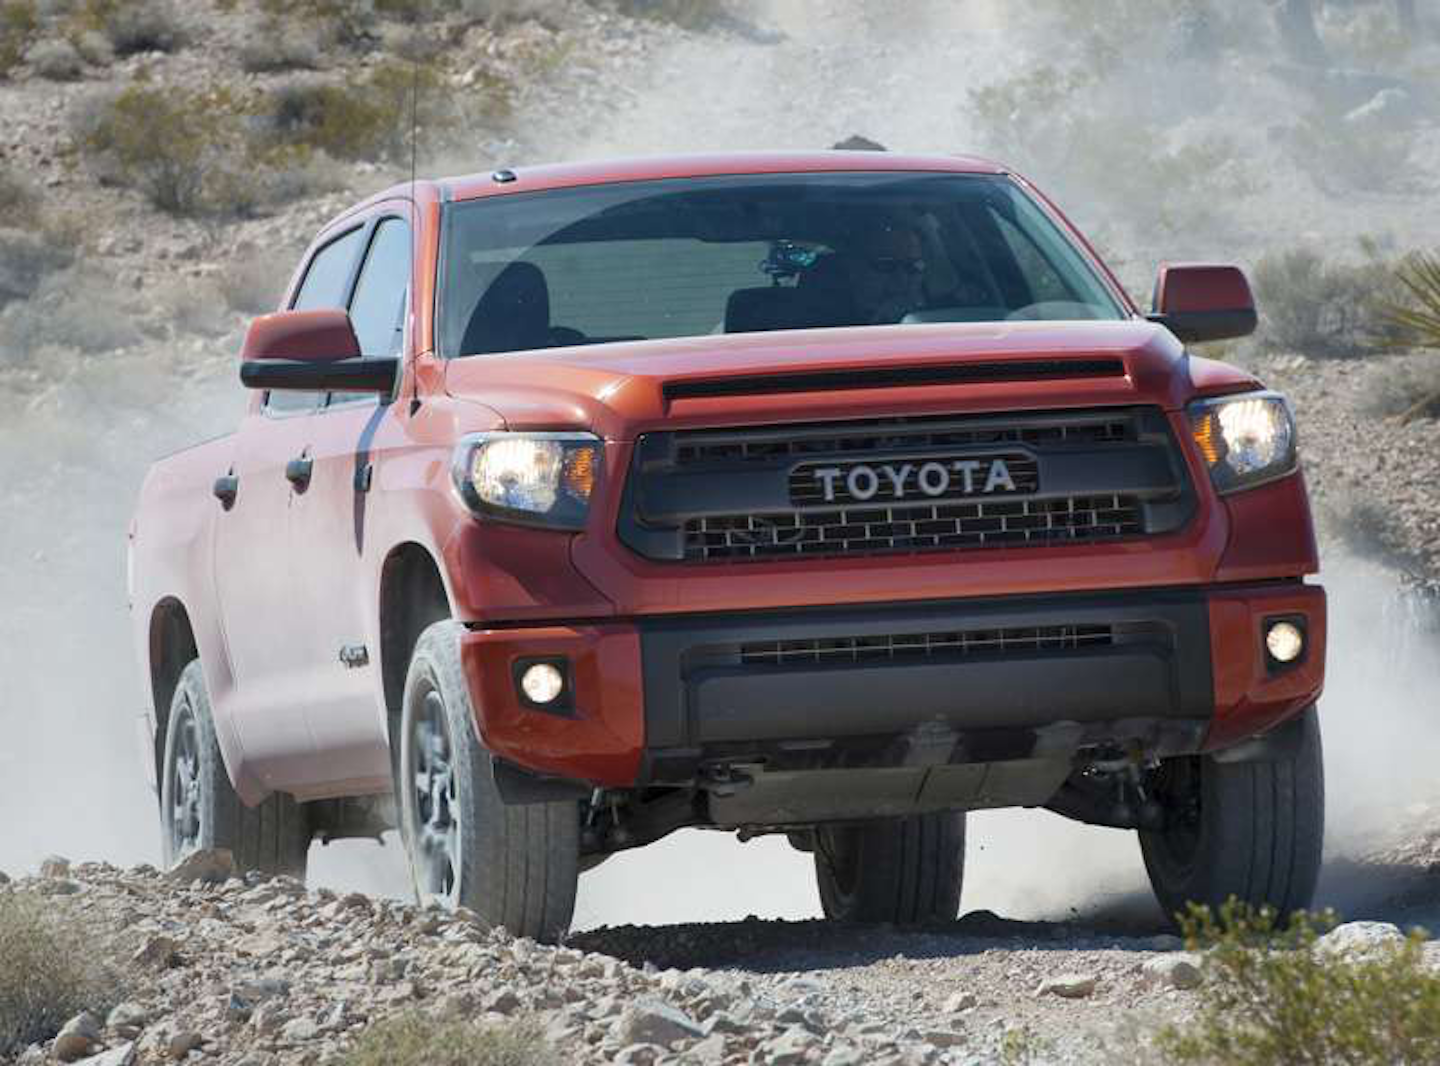 The 2015 Toyota Tundra will get the TRD Pro suspension option, so we